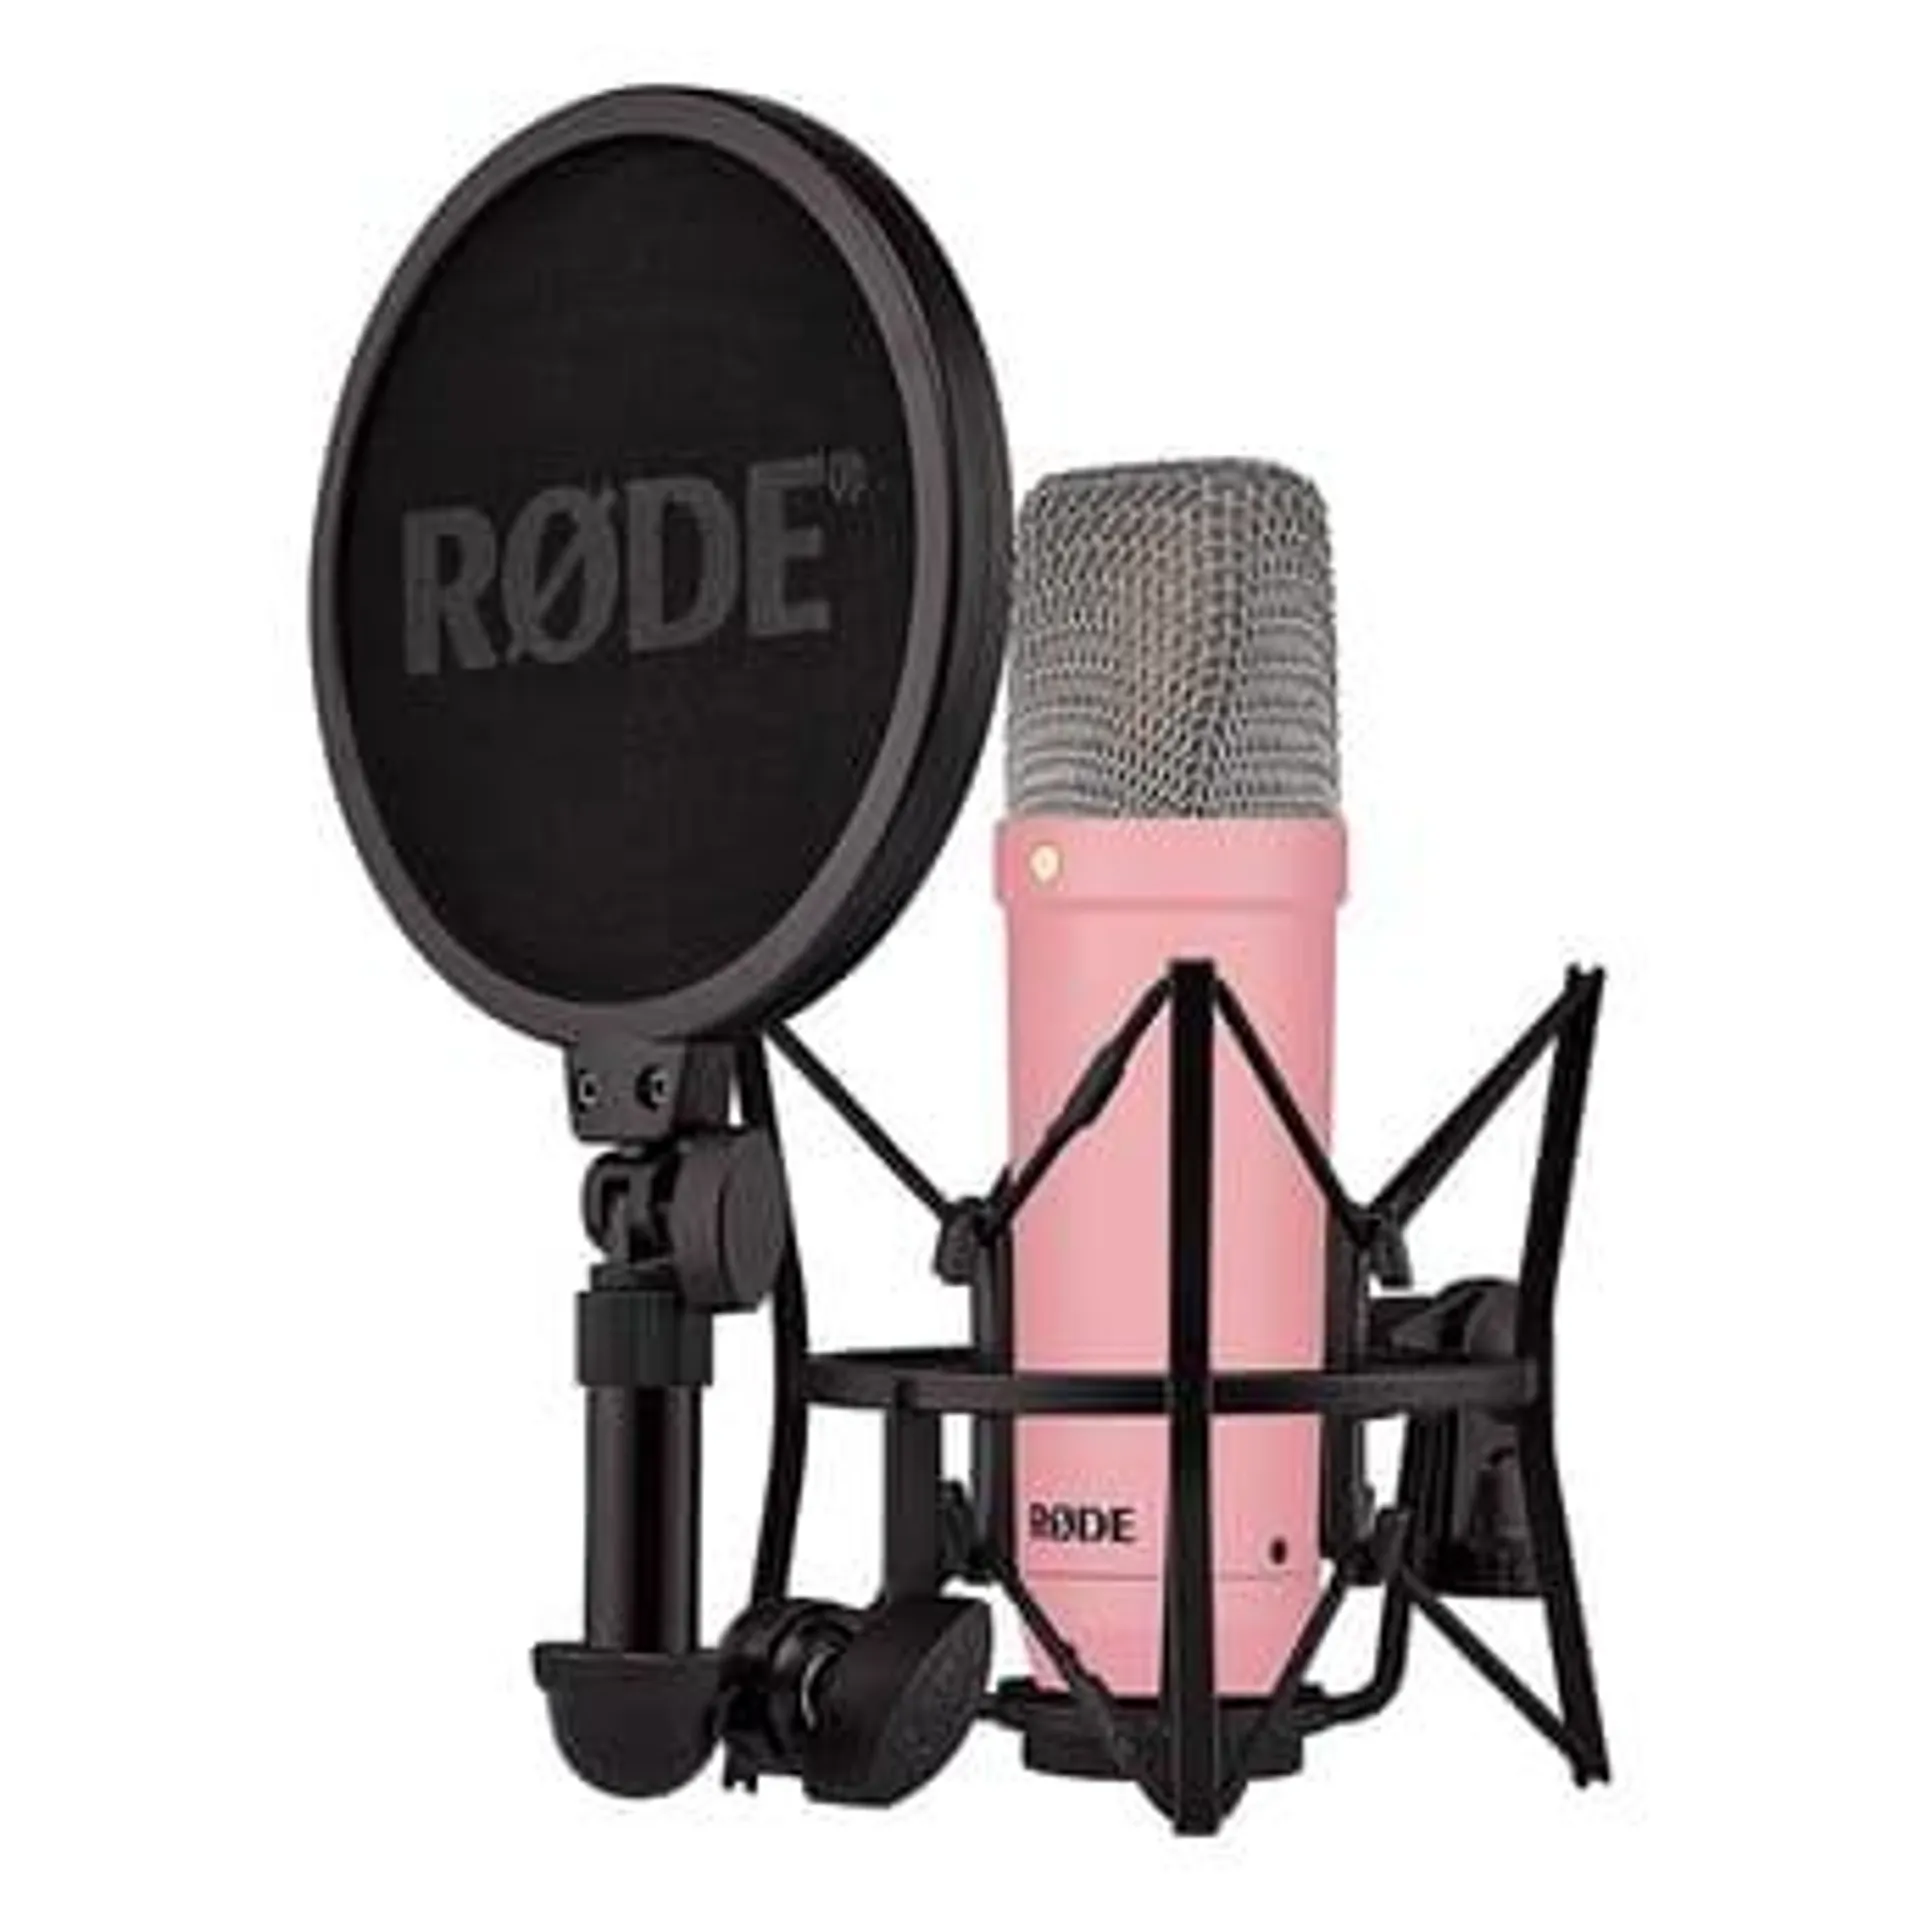 RODE NT1 Signature Series Condenser Microphone (Pink)